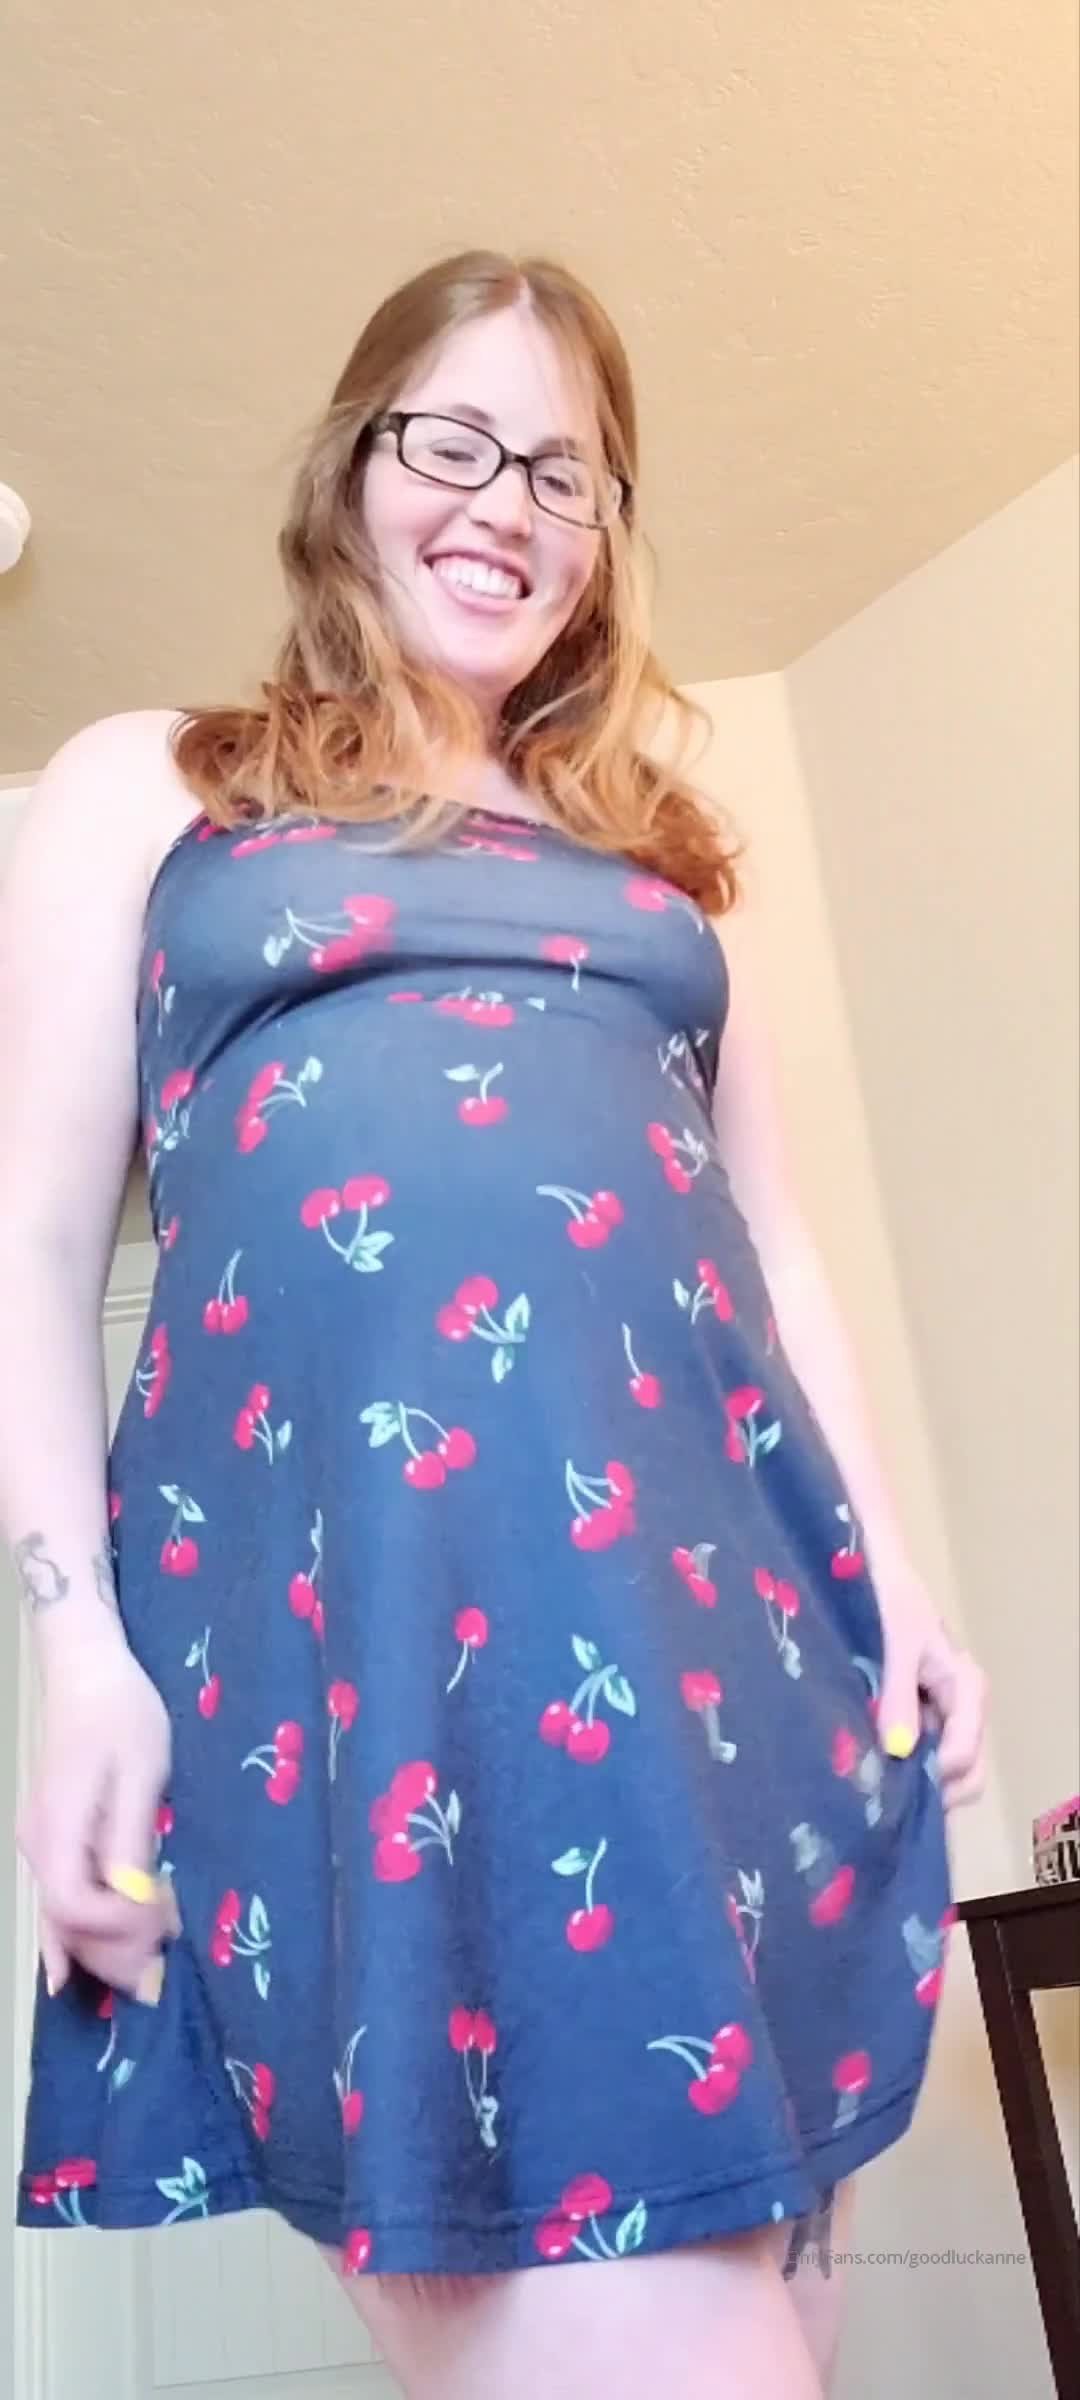 Video post by ihousewife